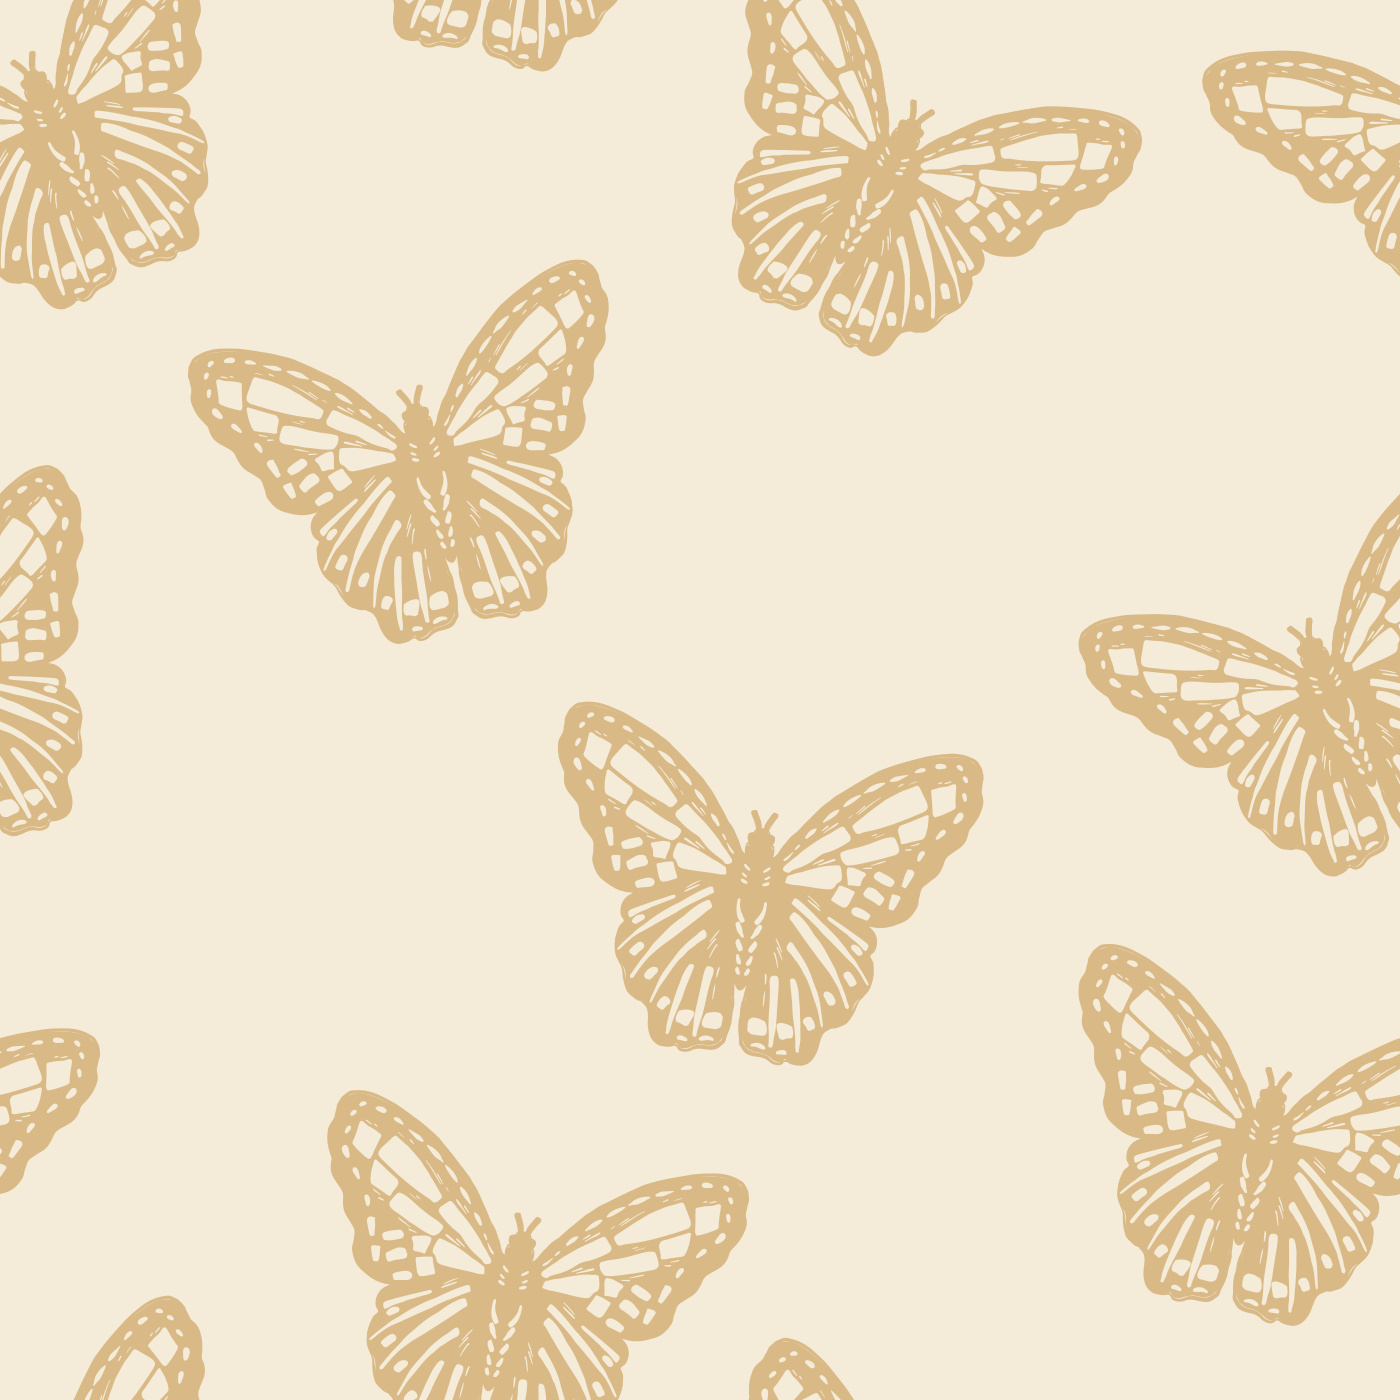 Stamped Butterflies Peel And Stick Removable Wallpaper